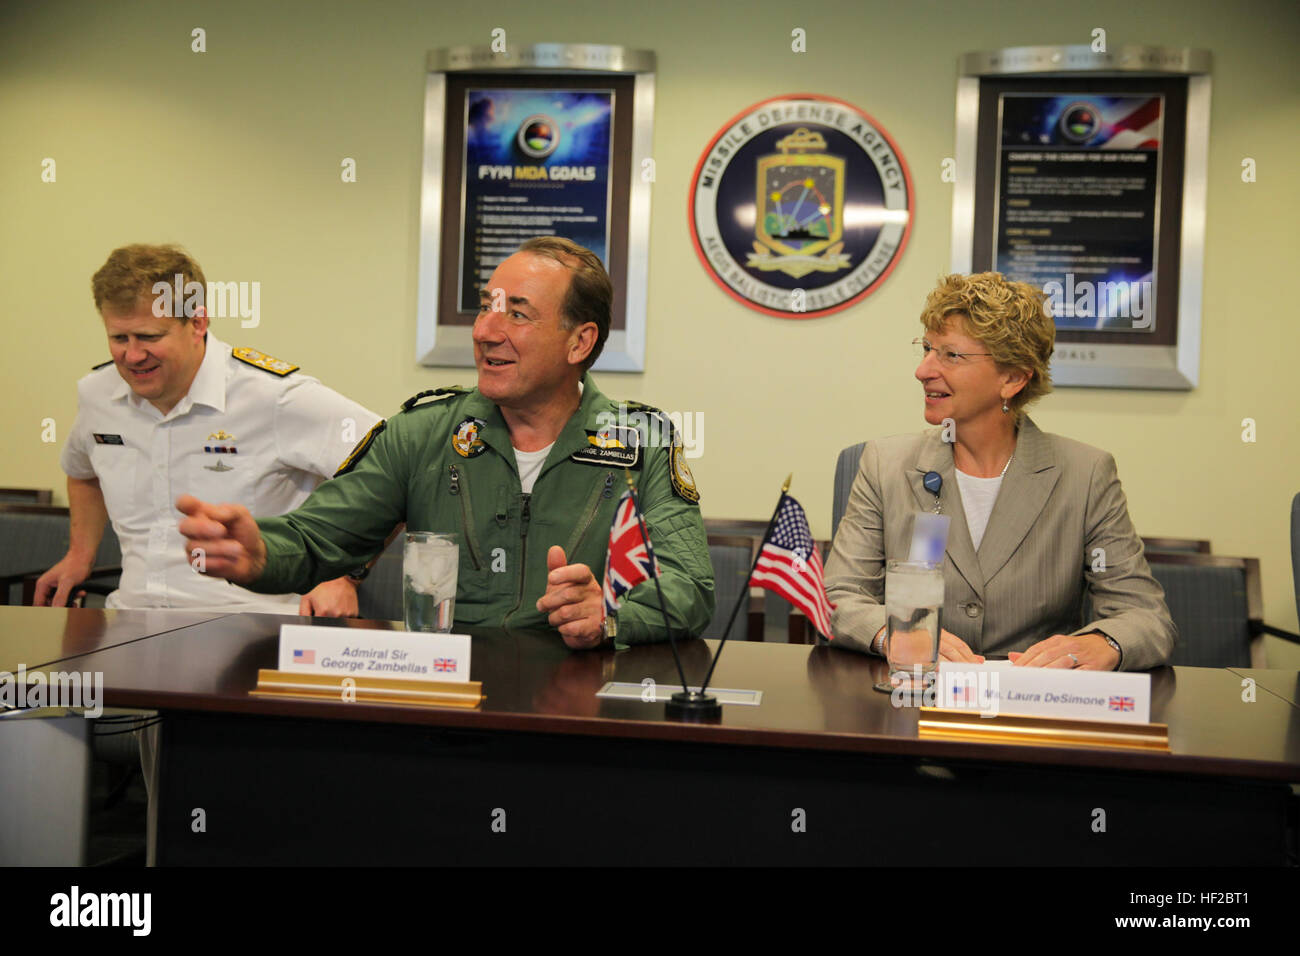 The First Sea Lord and Chief of Naval Staff of the British Royal Navy, Adm. Sir George Zambellas, center, attends a brief alongside Laura DeSimone at the Missile Defense Agency at Dahlgren, Va., July 29, 2014. Zambellas is taking part in the Commandant of the Marine Corps' Counterpart Program, which invites foreign military leaders to visit the United States and interact with U.S. military leaders. (U.S. Marine Corps photo by Cpl. Michael C. Guinto/Released) Note: portions of this image have been blurred for security. First Sea Lord Counterpart Visit 140729-M-LI307-478 Stock Photo